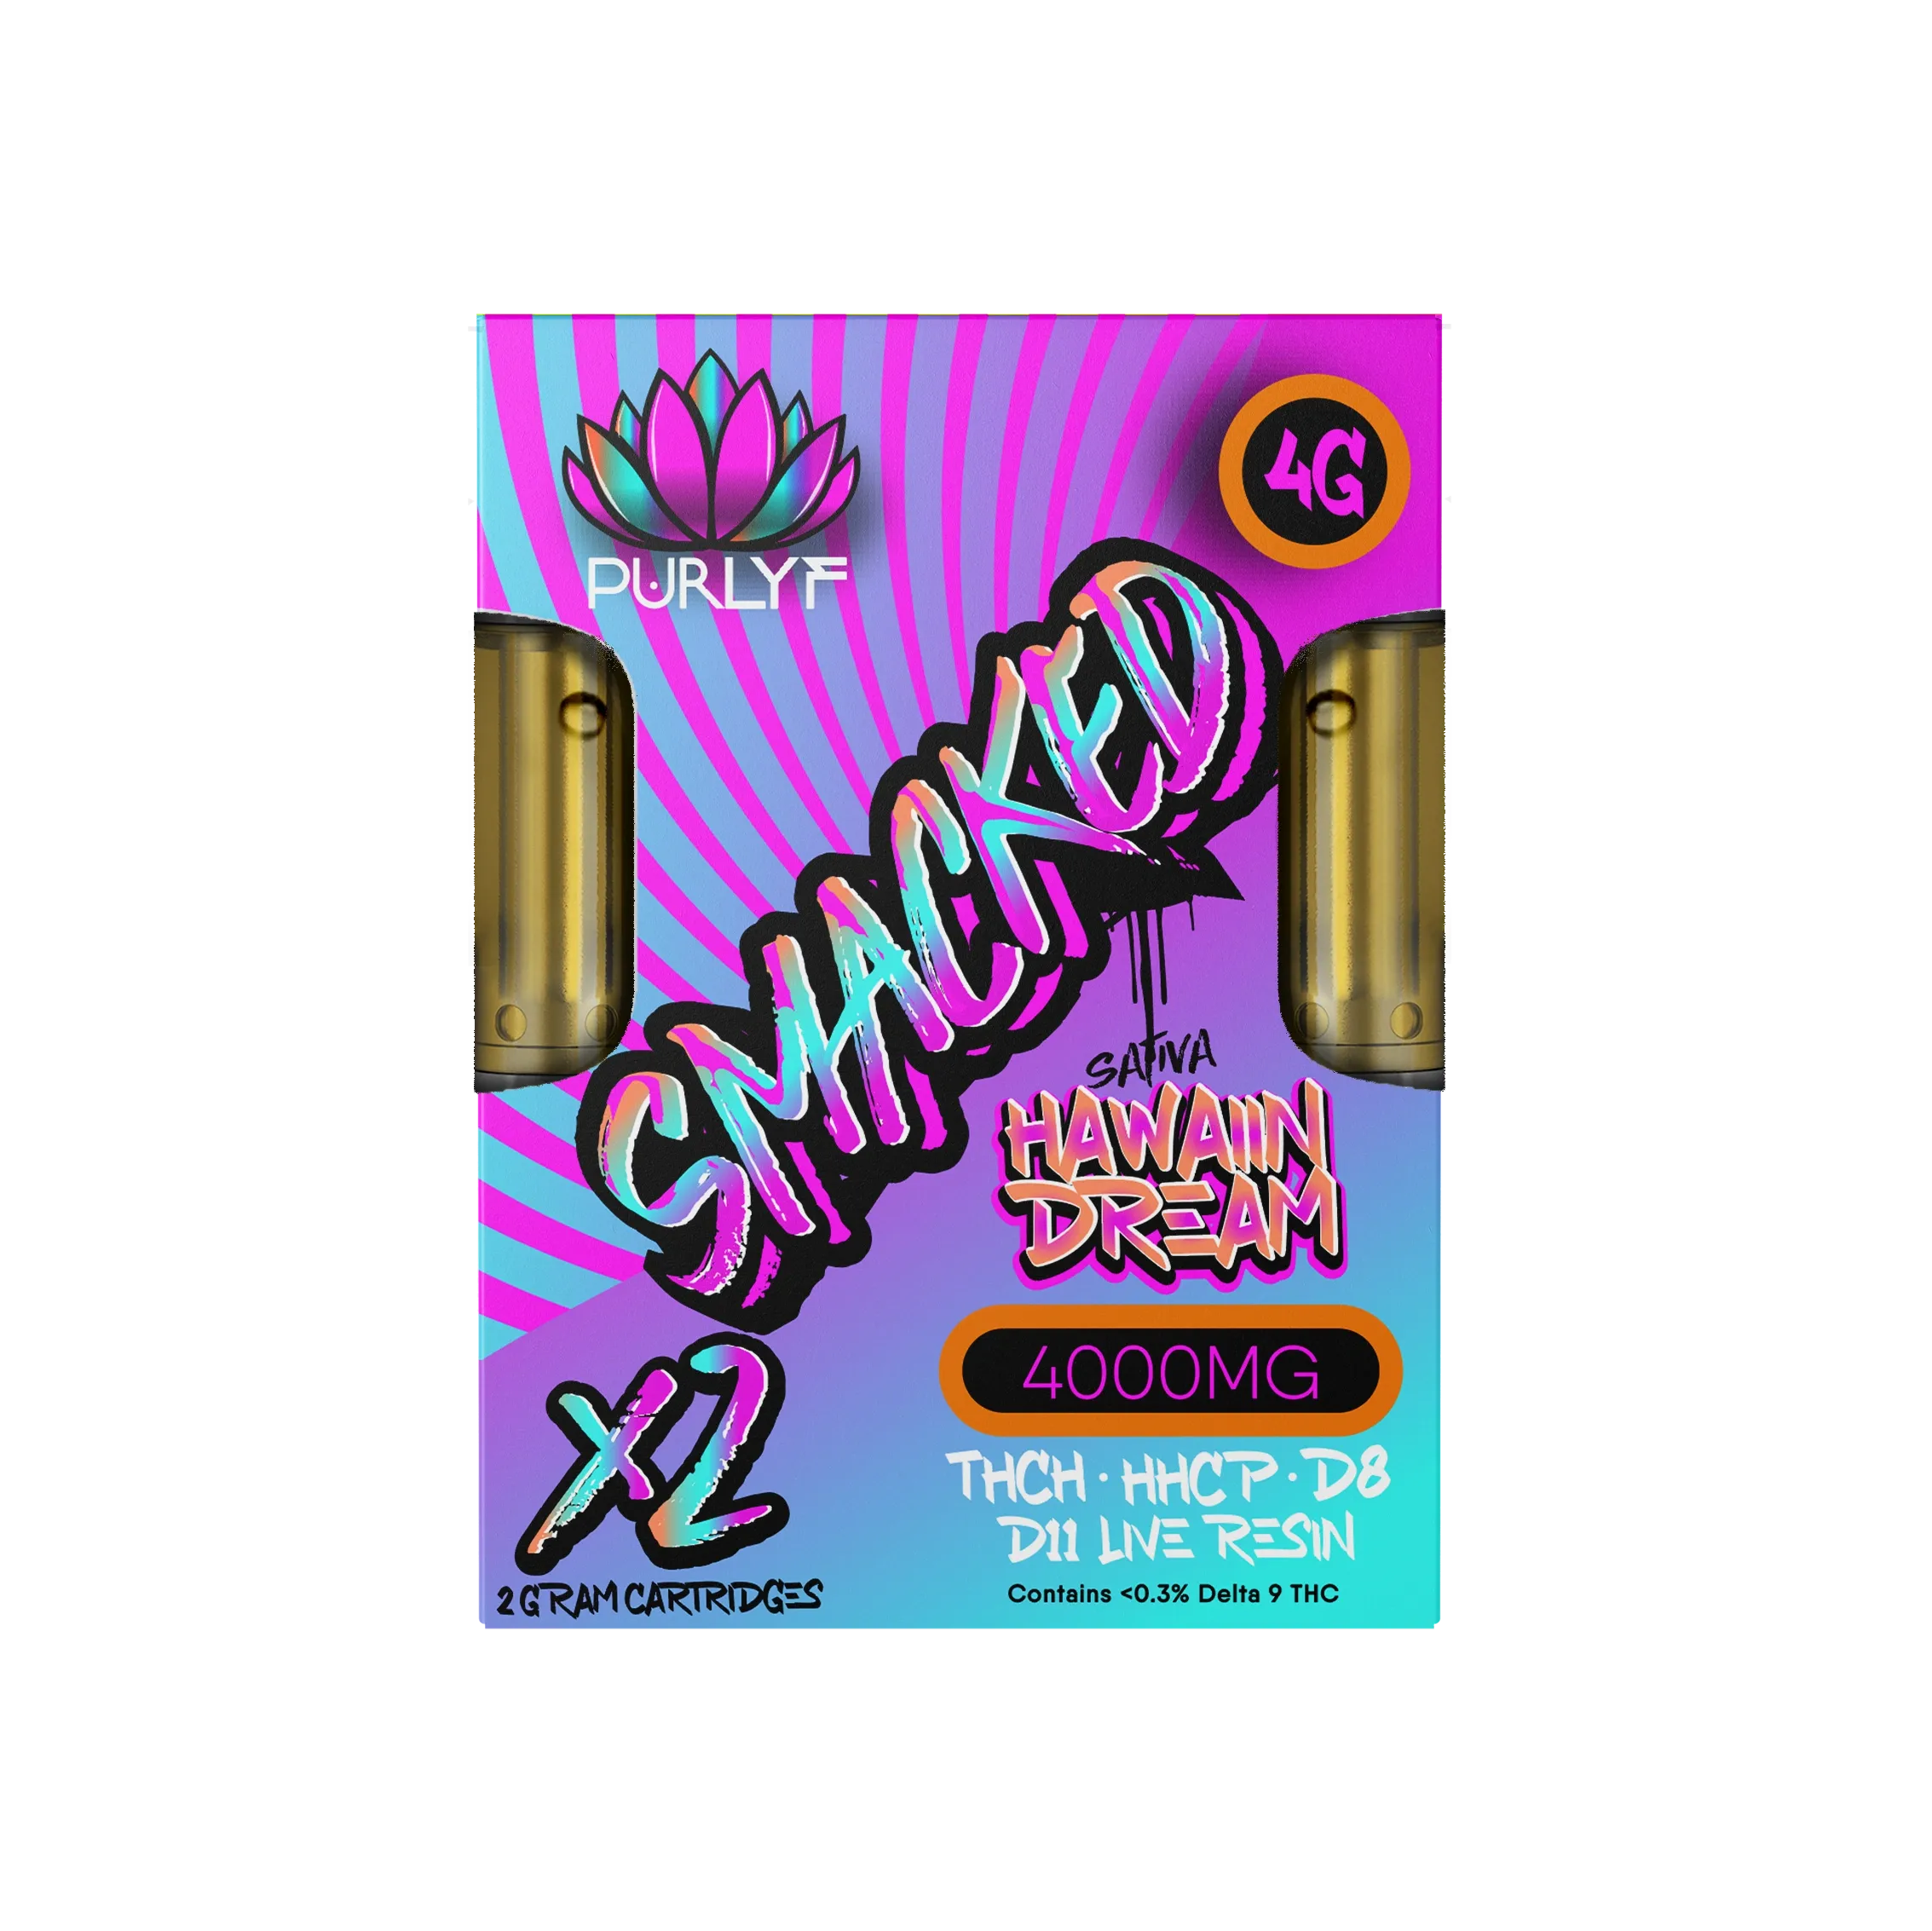 Purlyf Smacked X2 THC-H + HHC-P + D8 + D11 Live Resin Cartridges (4g) Best Price